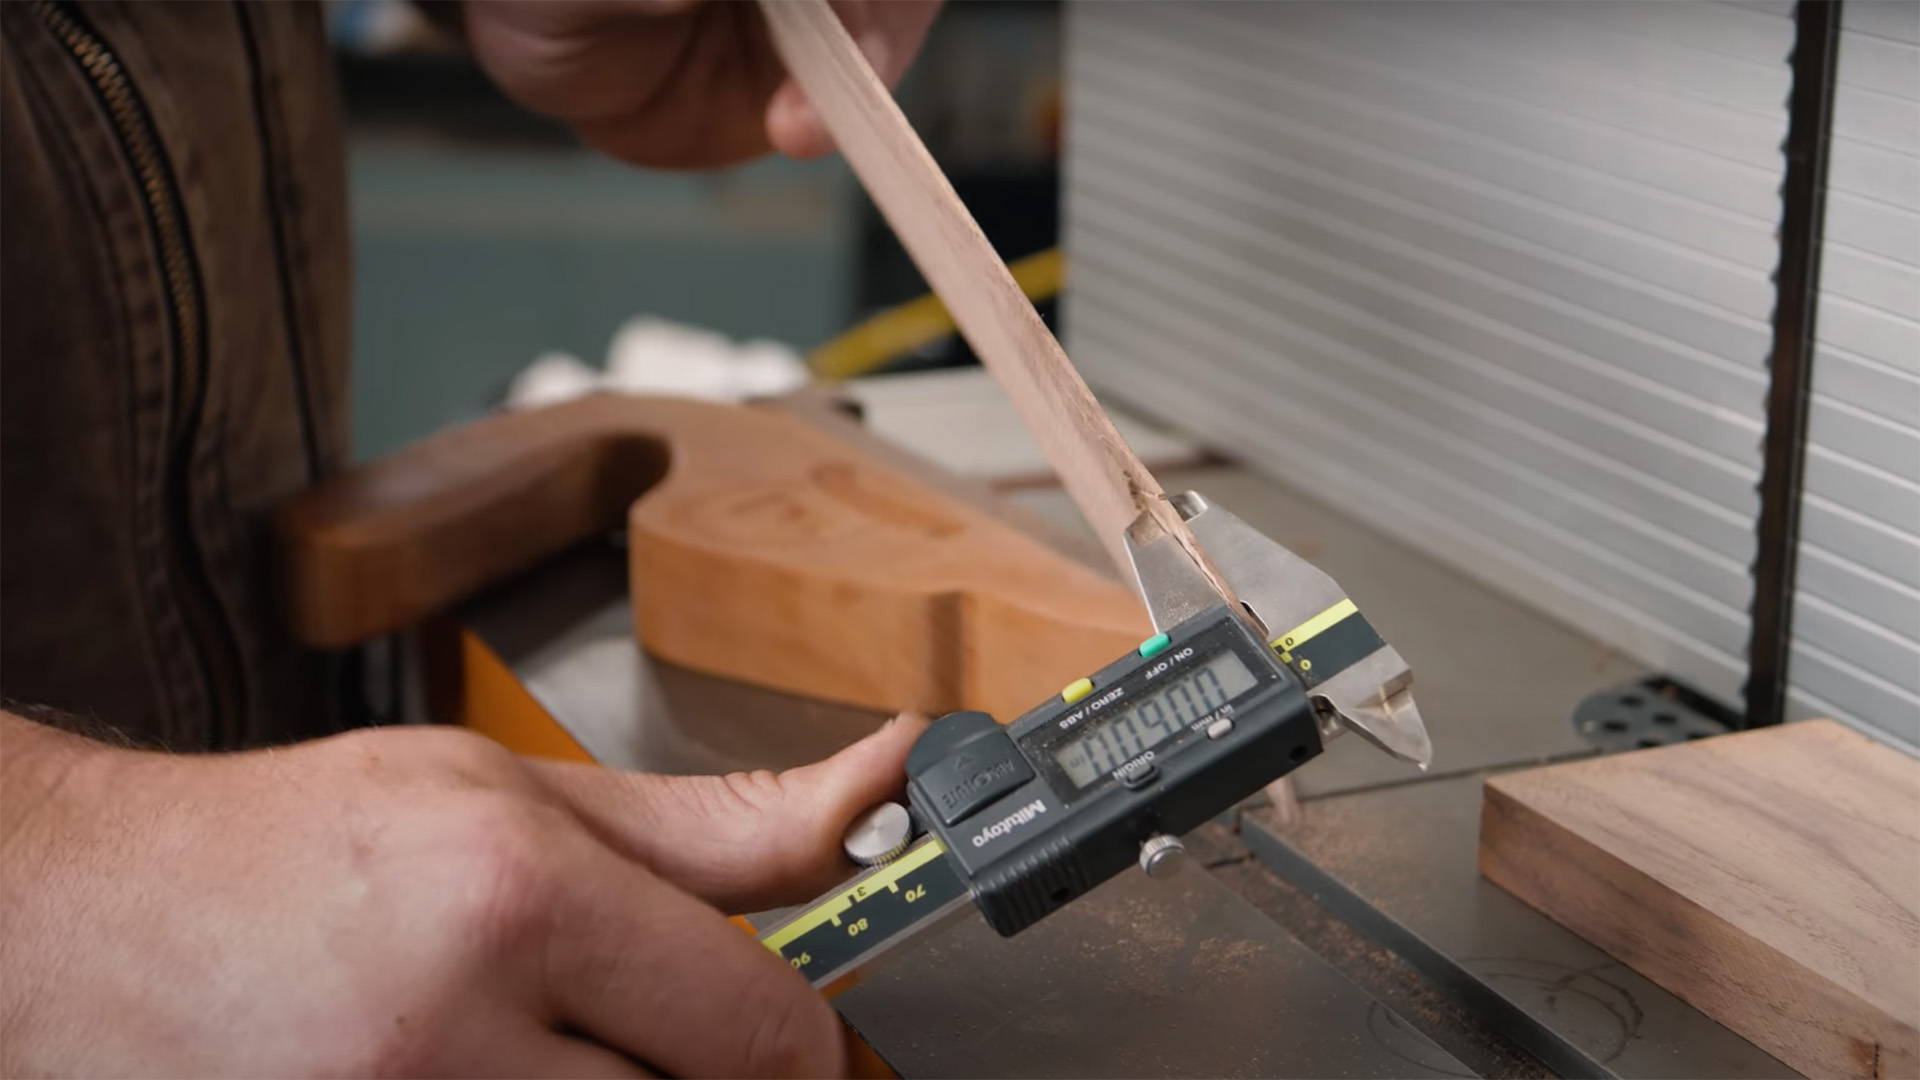 using a pair of digital calipers to measure the thickness of a board